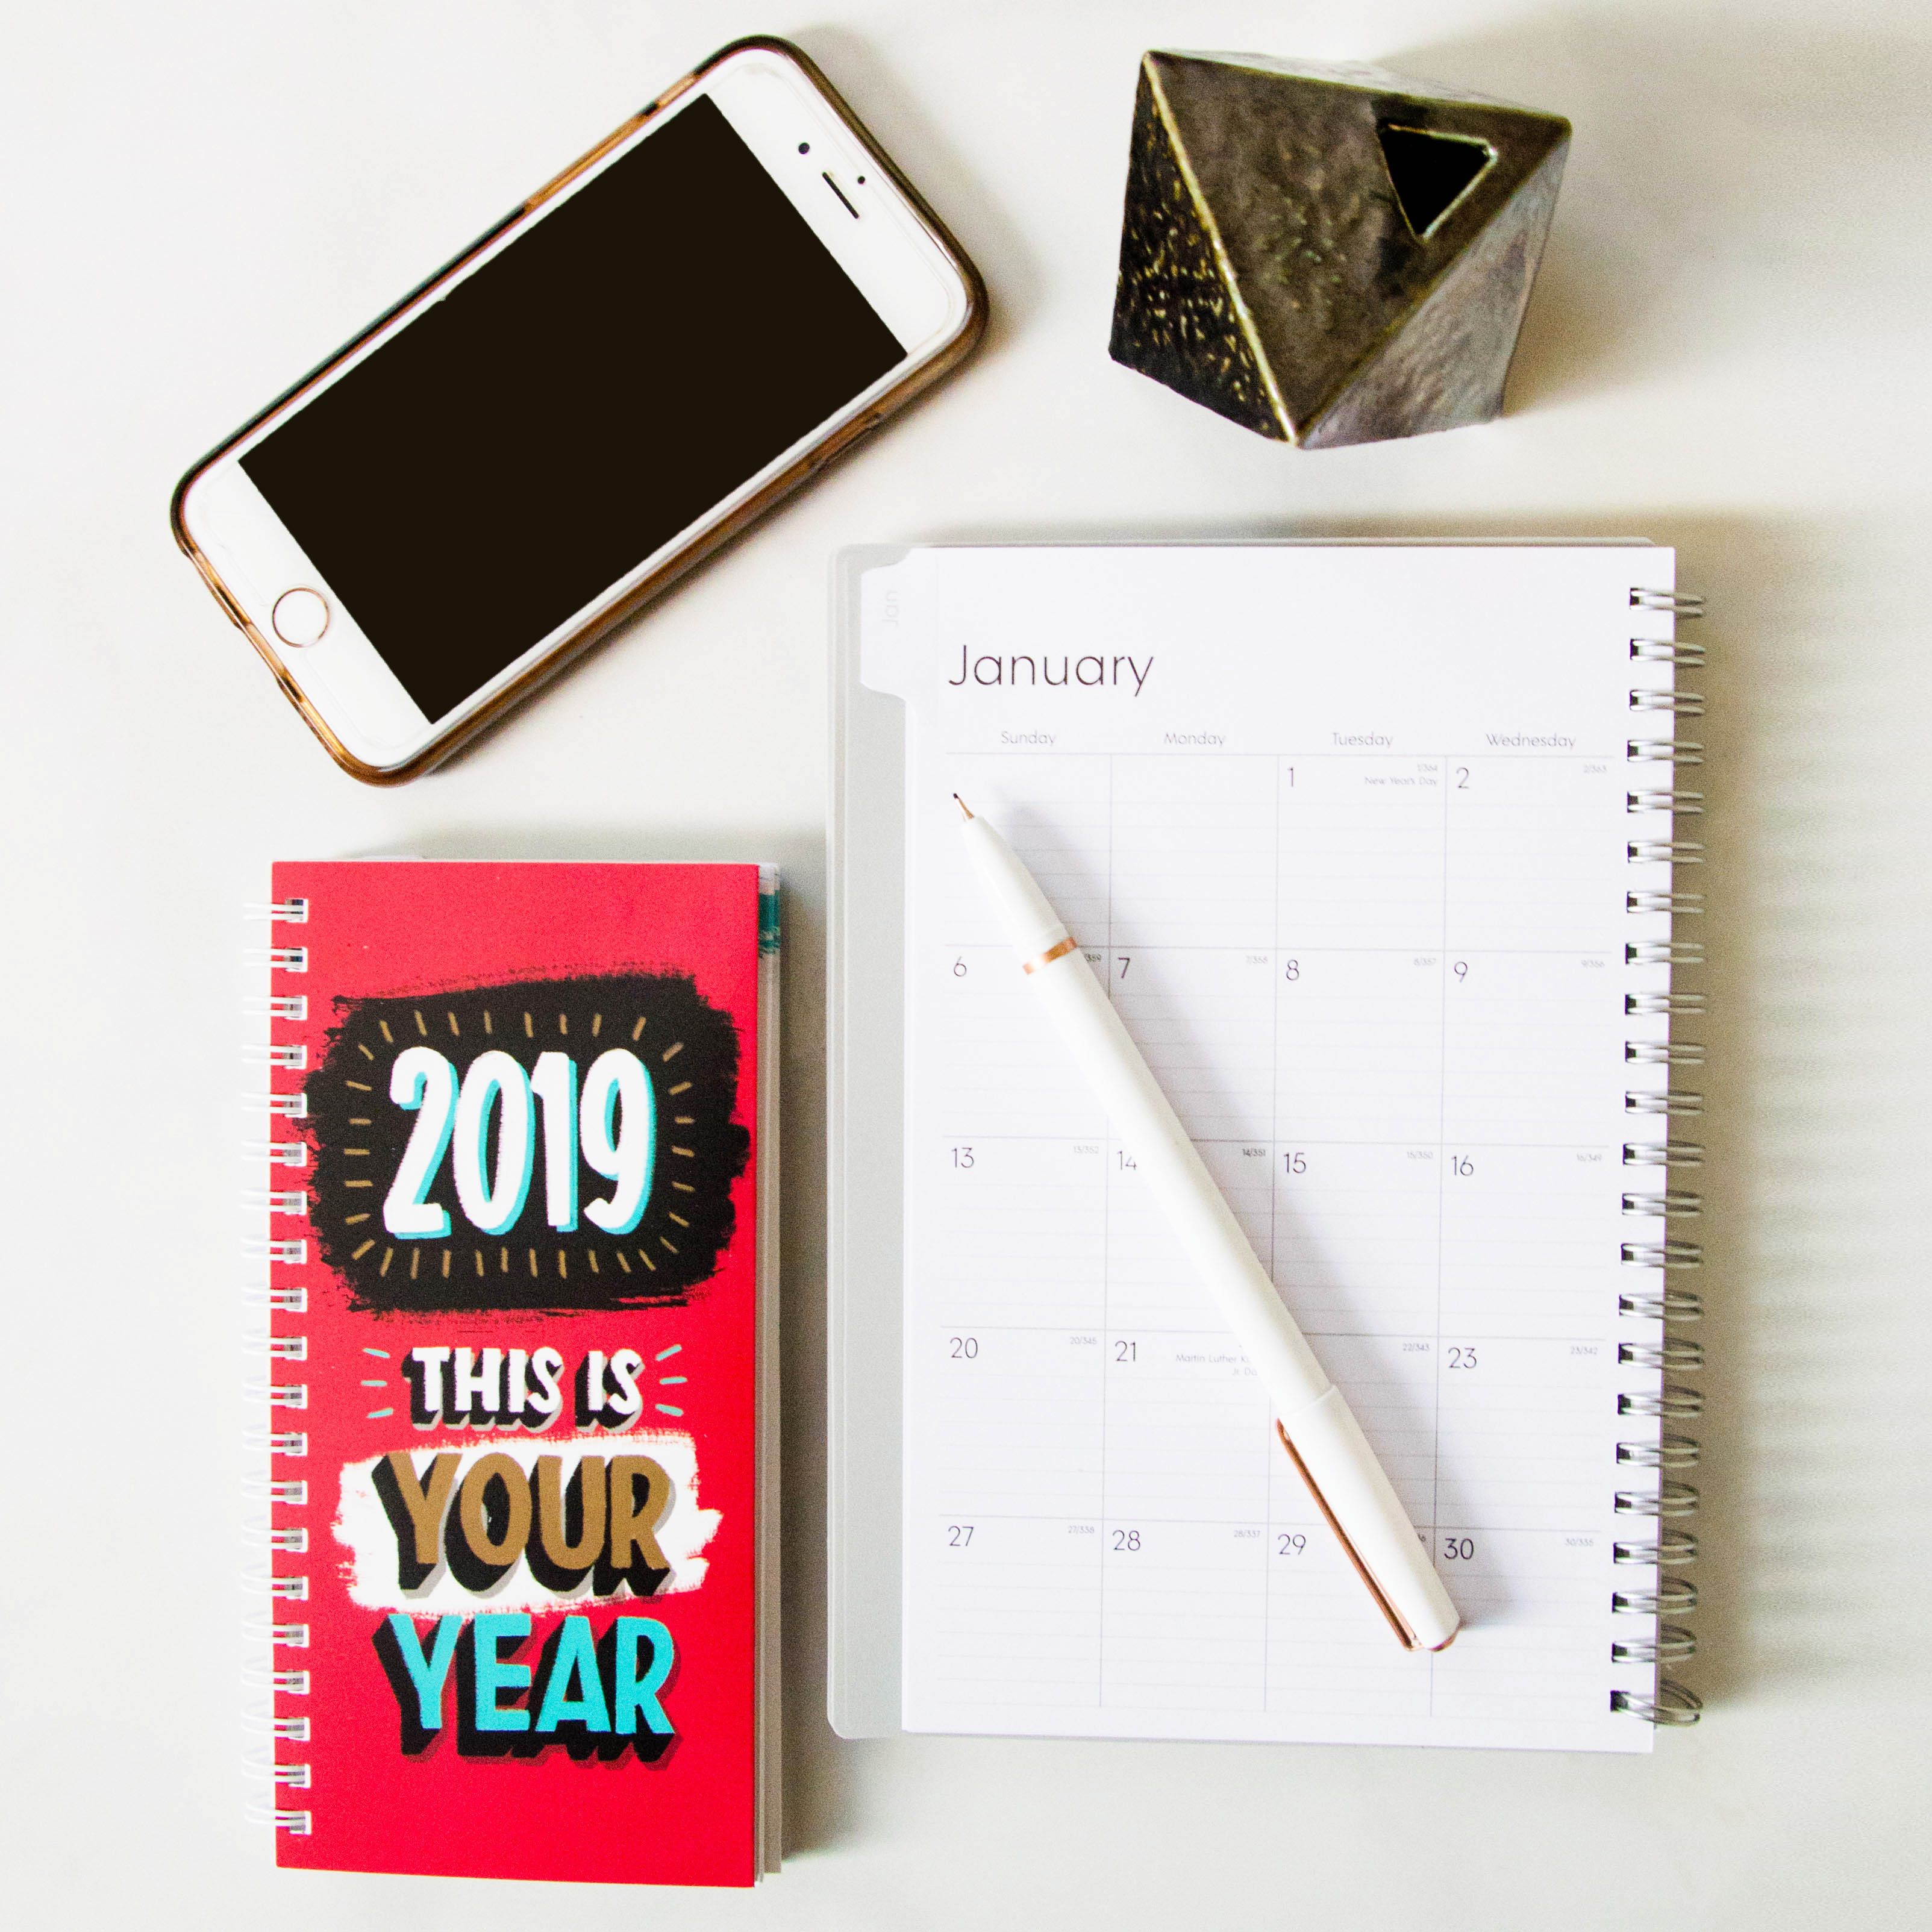 Five Ways to Refresh Your Work Routine for the New Year